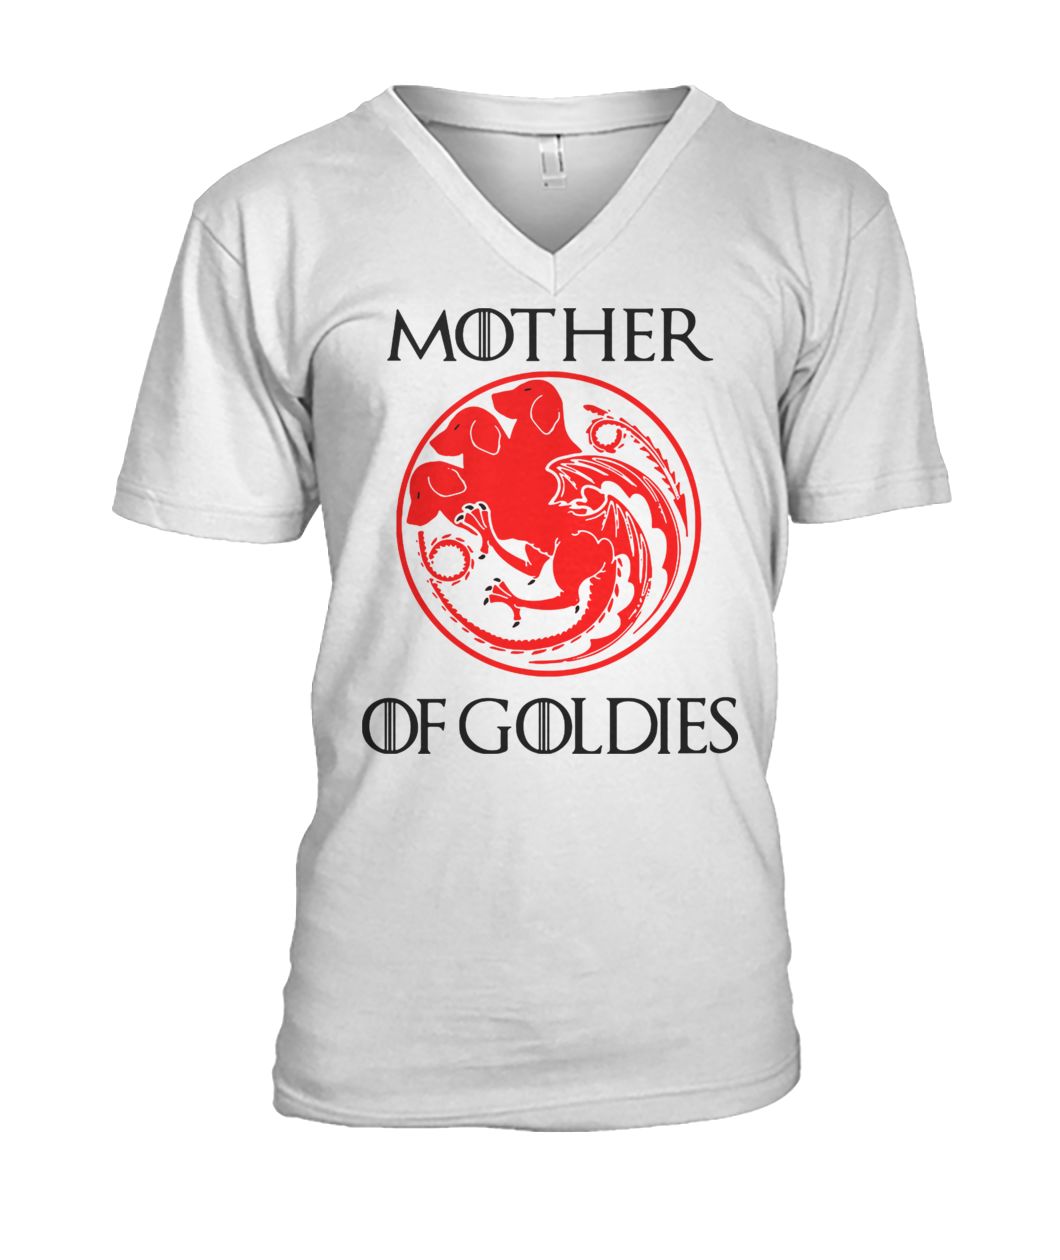 Game of thrones mother of goldies mens v-neck